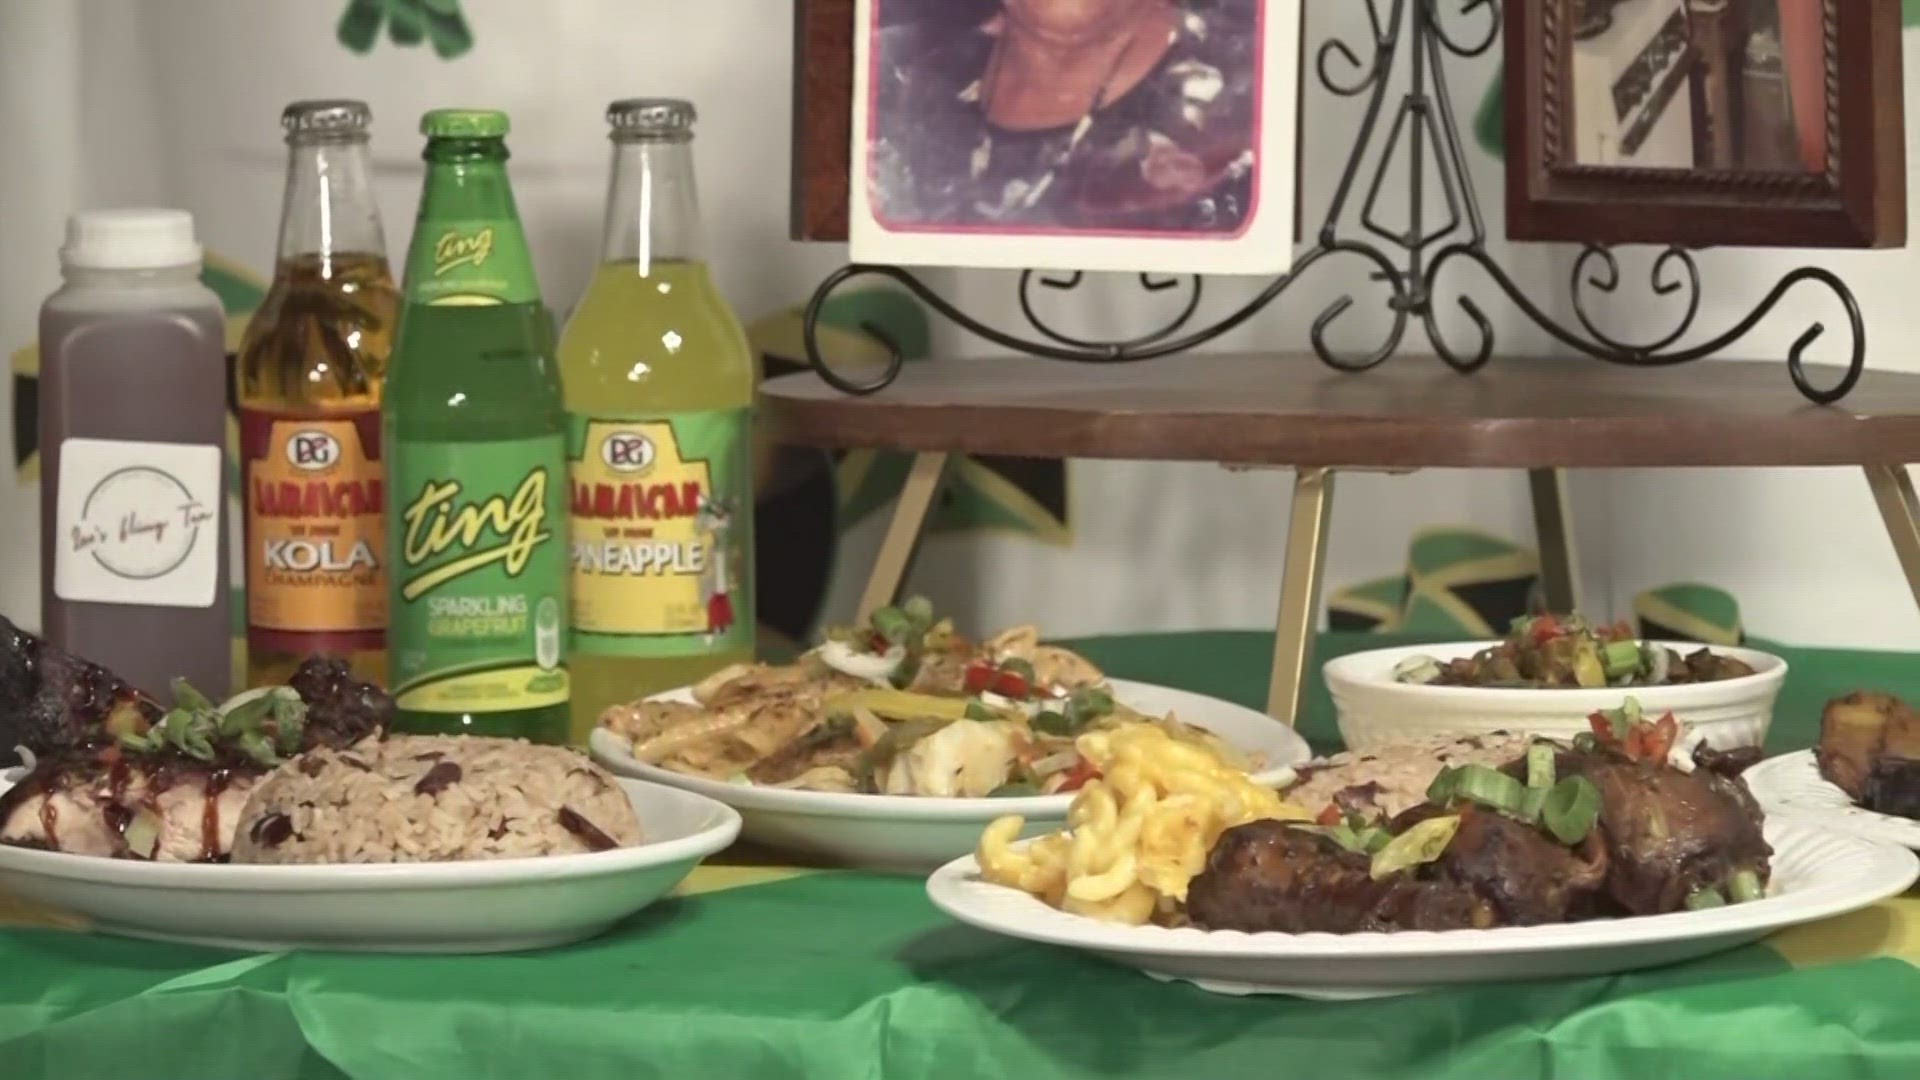 Tevian Whitehurst takes us to Dulcie's Cafe where their signature dish is their jerk chicken.